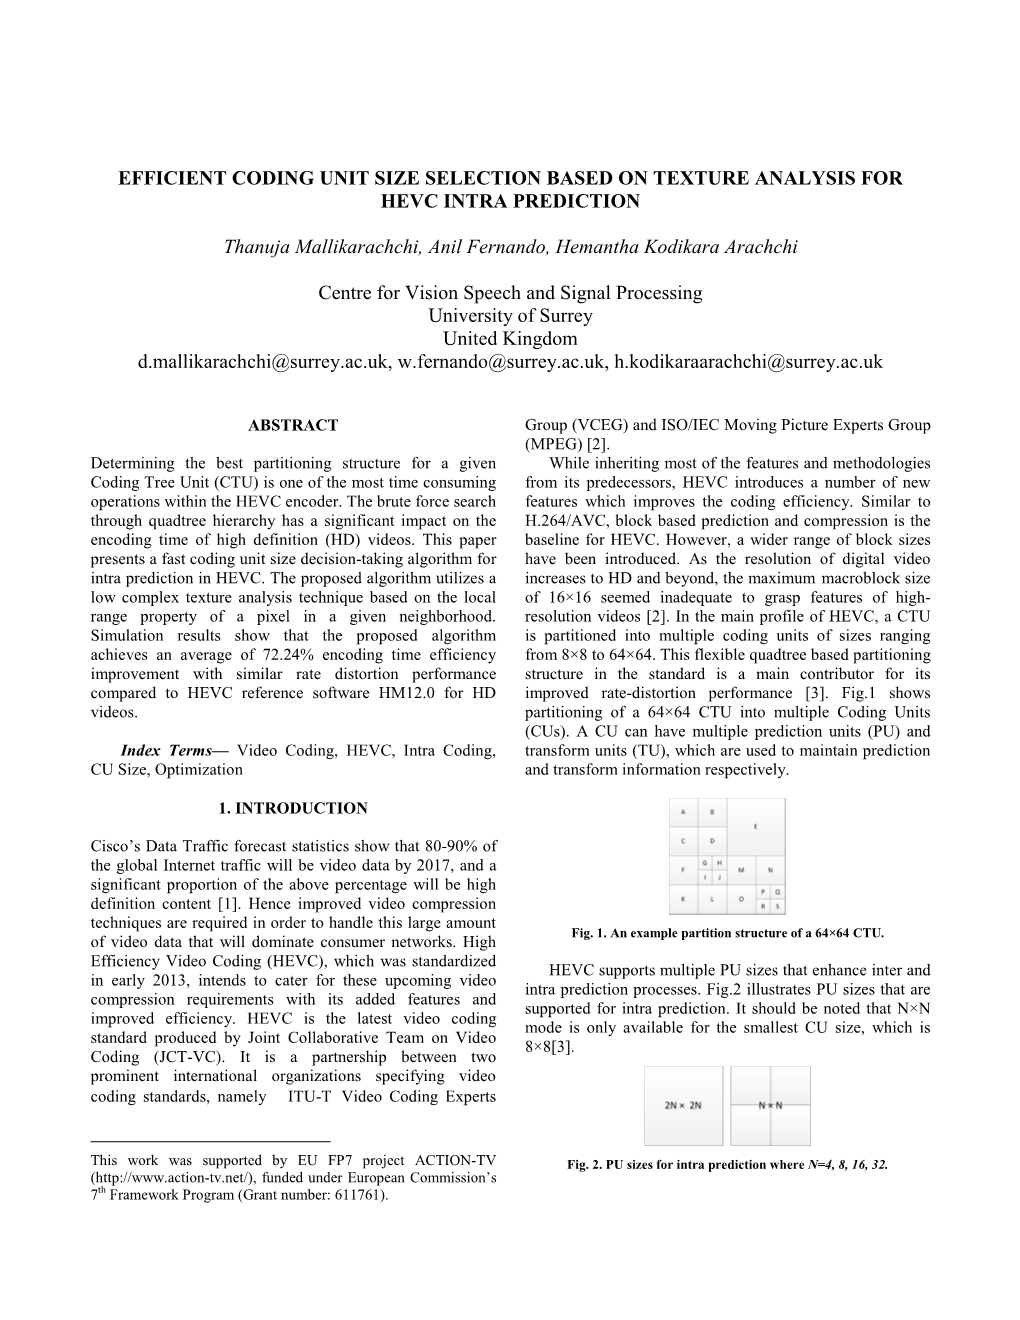 Efficient Coding Unit Size Selection Based on Texture Analysis for Hevc Intra Prediction